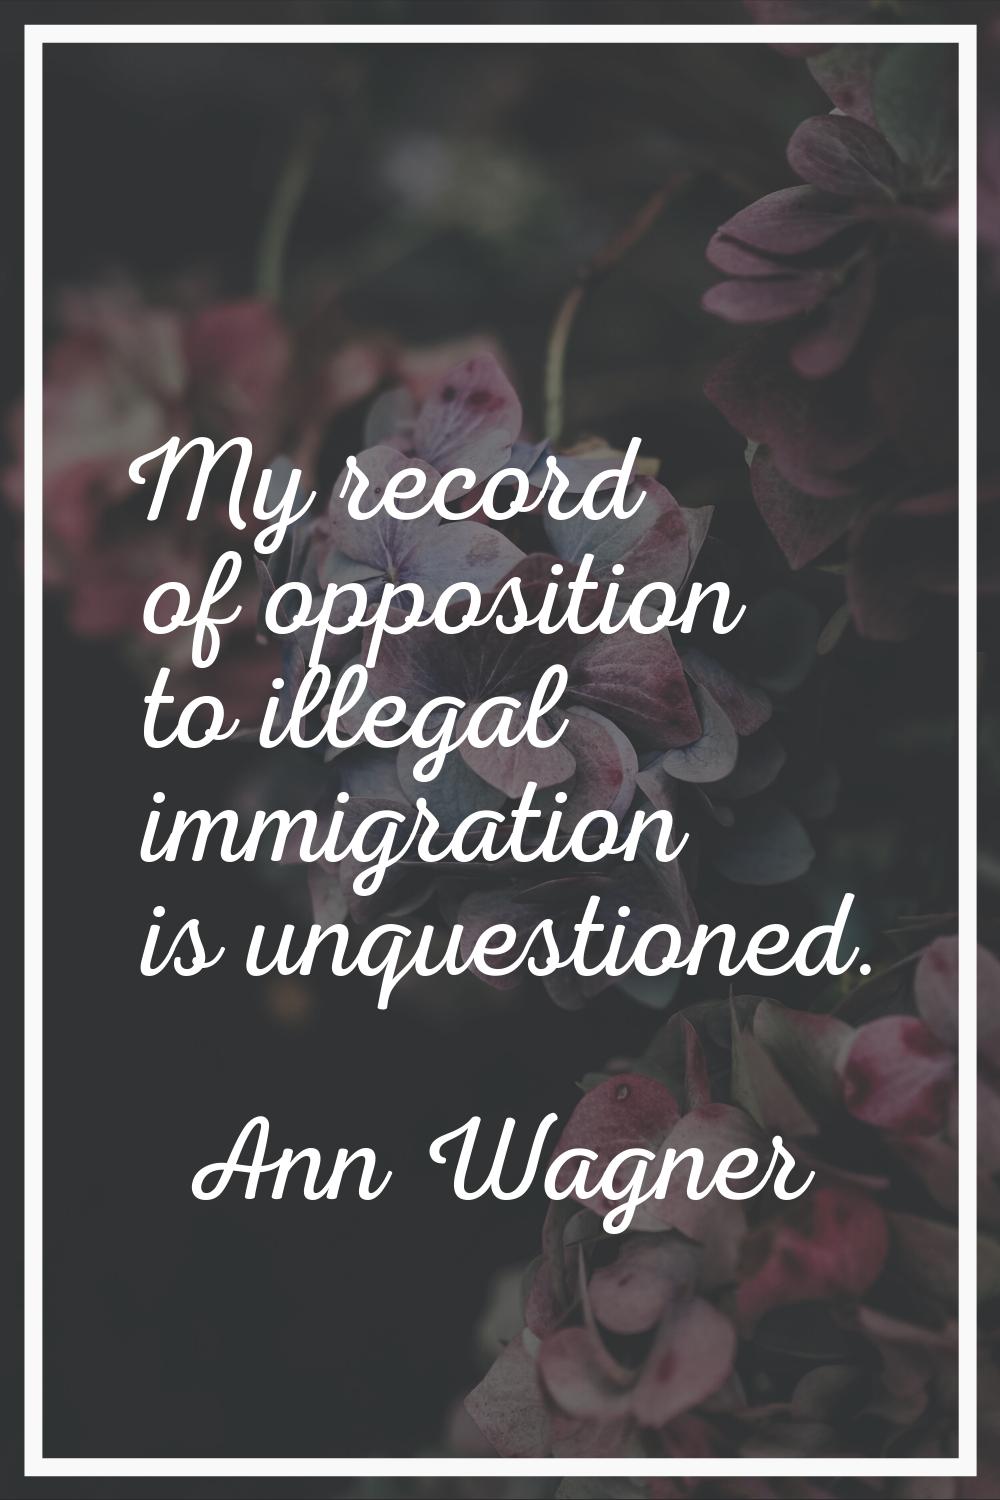 My record of opposition to illegal immigration is unquestioned.